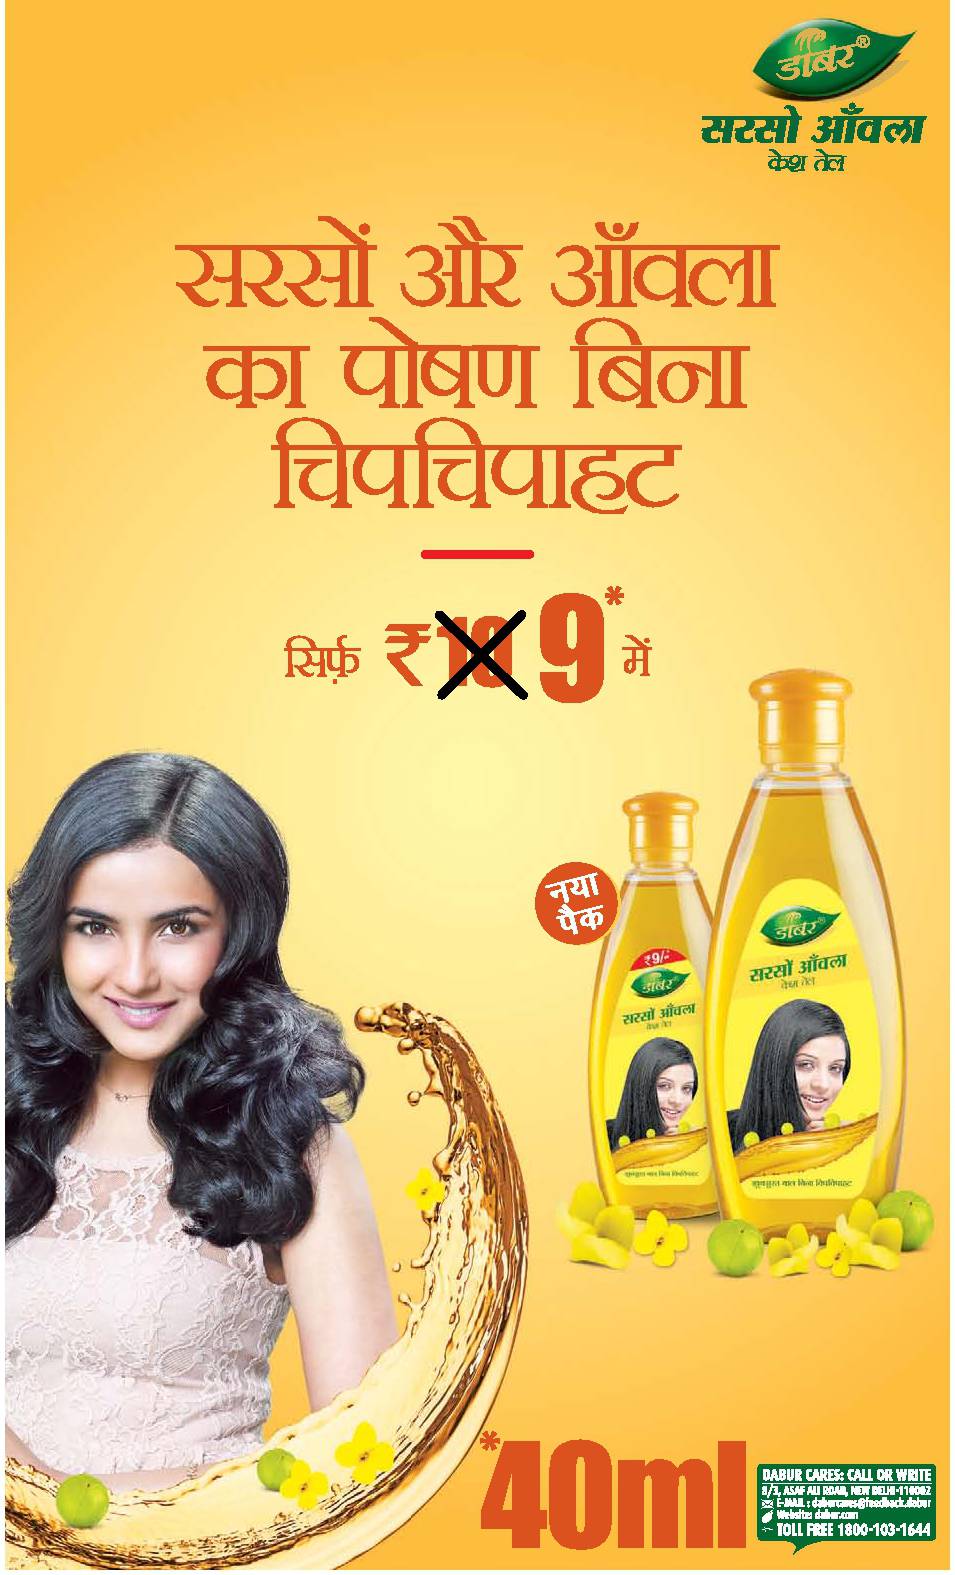 Advertisement for Saffola Marico hair oil with Alia Bhatt in white, two oil bottles on right, details in Hindi, and price Rs. 9 for 40ml